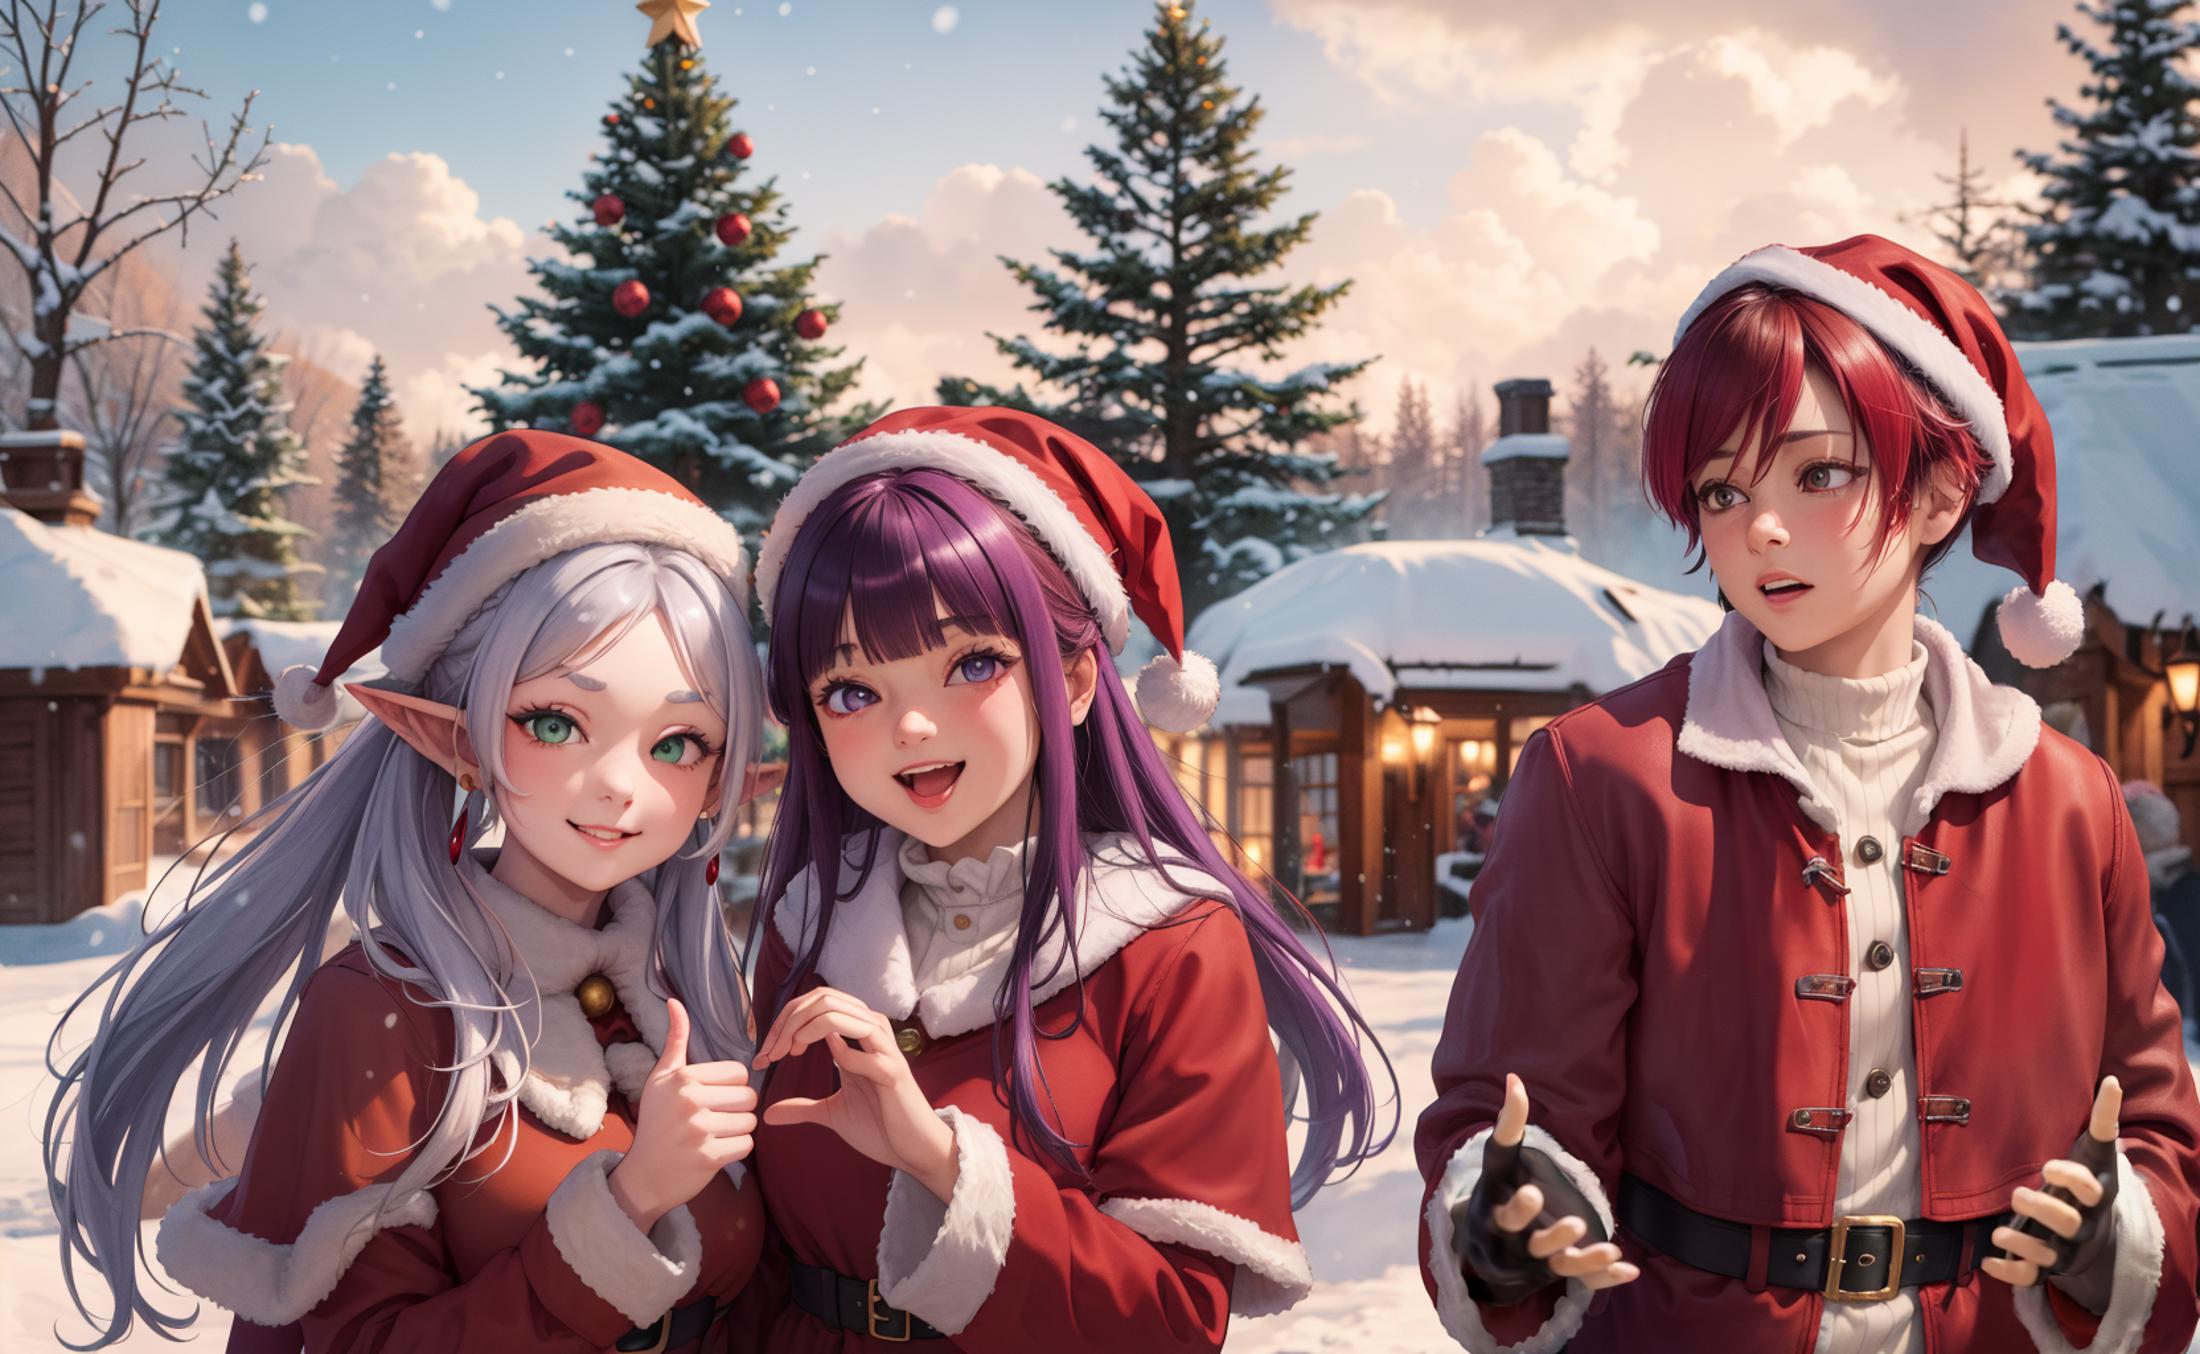 A cartoon image of three Christmas elves posing for a picture.